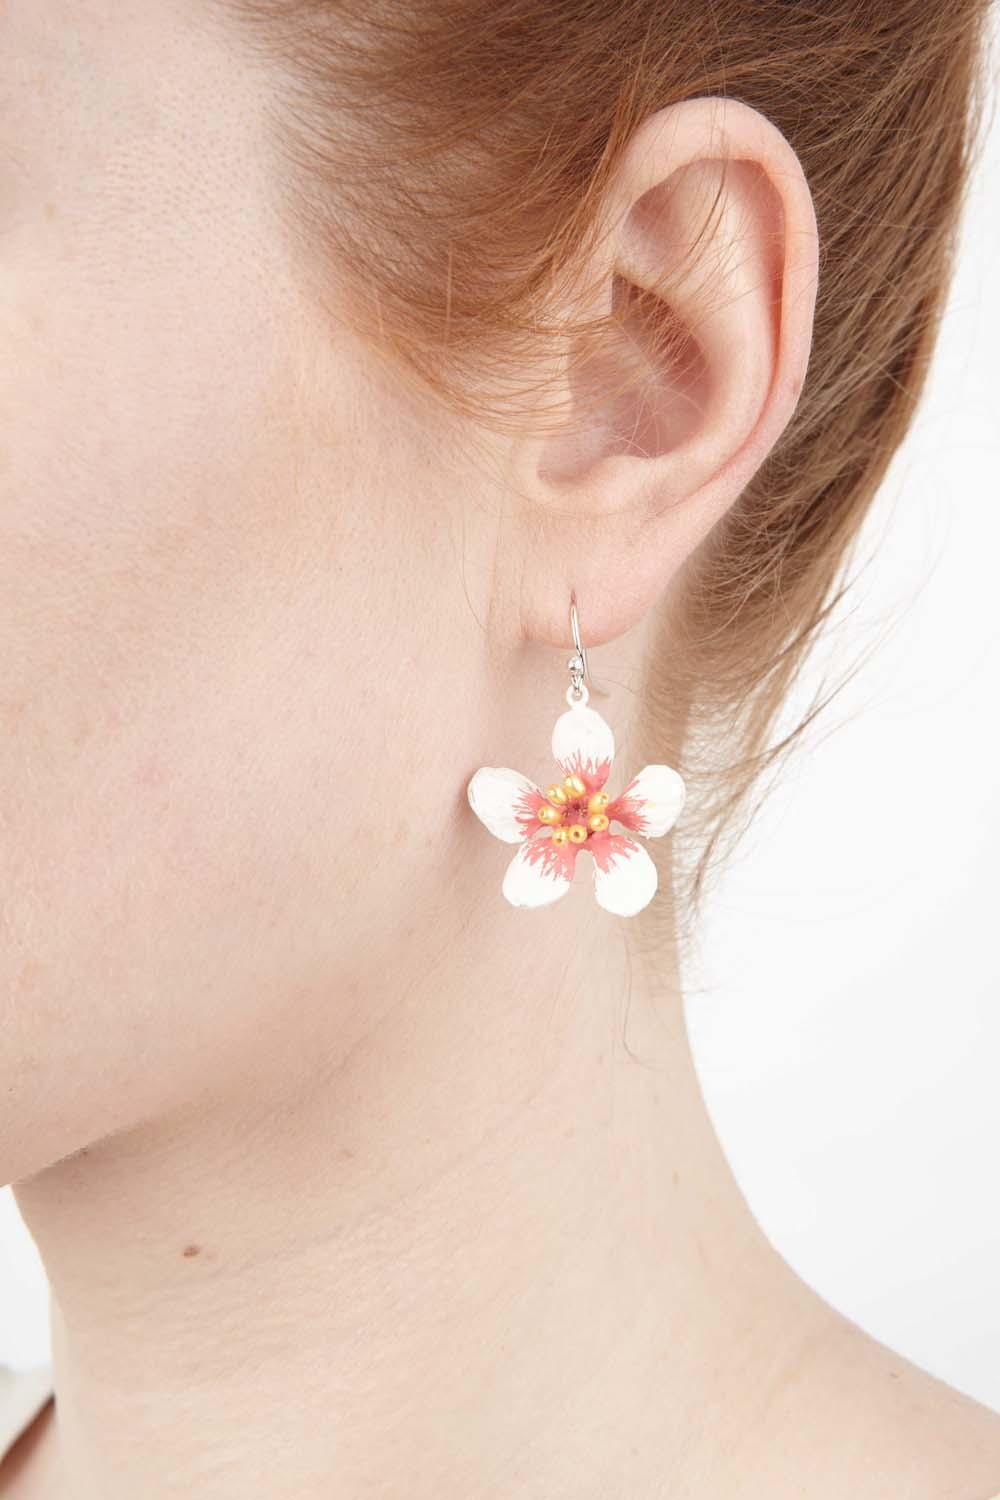 The Almond Blossom earrings are cast in hand patinated bronze with flowers featuring a matte white silver finish over bronze with yellow rice pearls. The wires are 925 Sterling Silver.